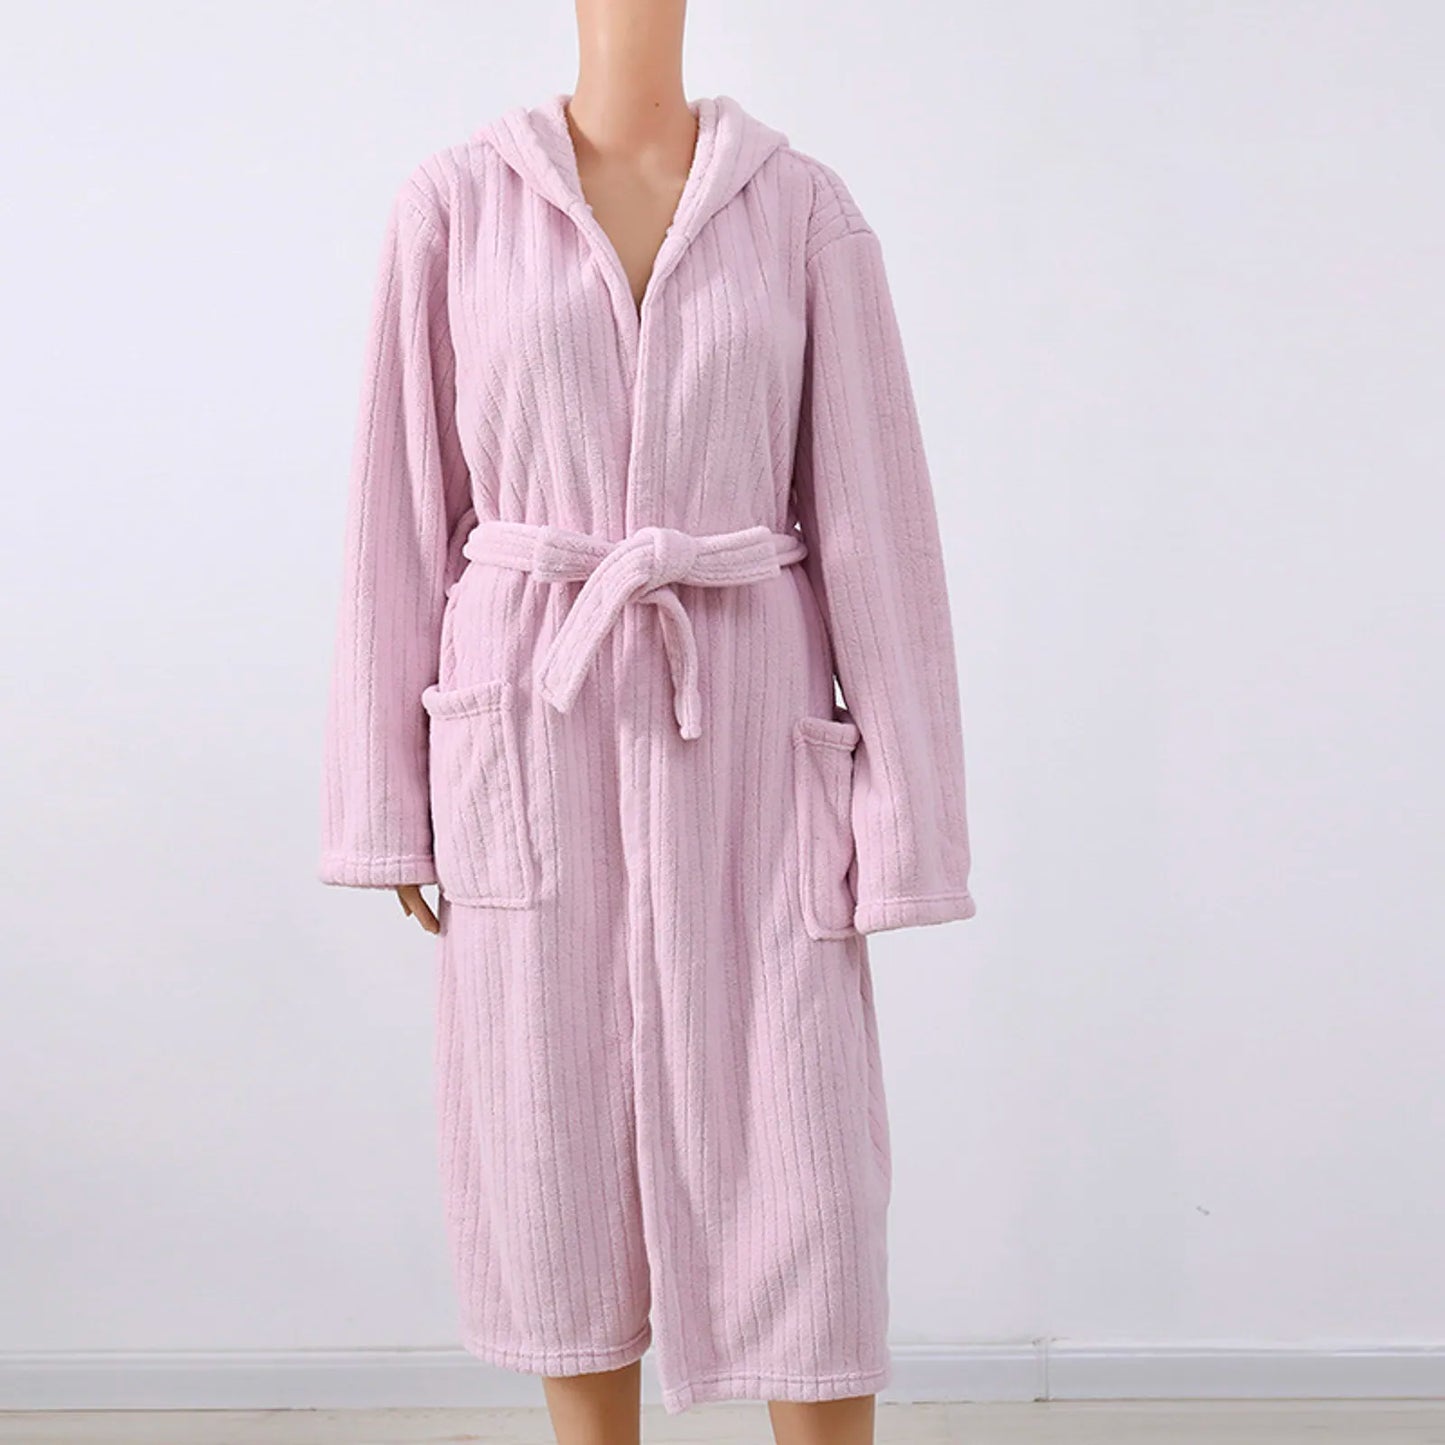 New Home Furnishings Bathrobes Absorbent Simple Bath Towels Comfortable Women's Pajamas Coral Womens Long Nightgowns And Robes